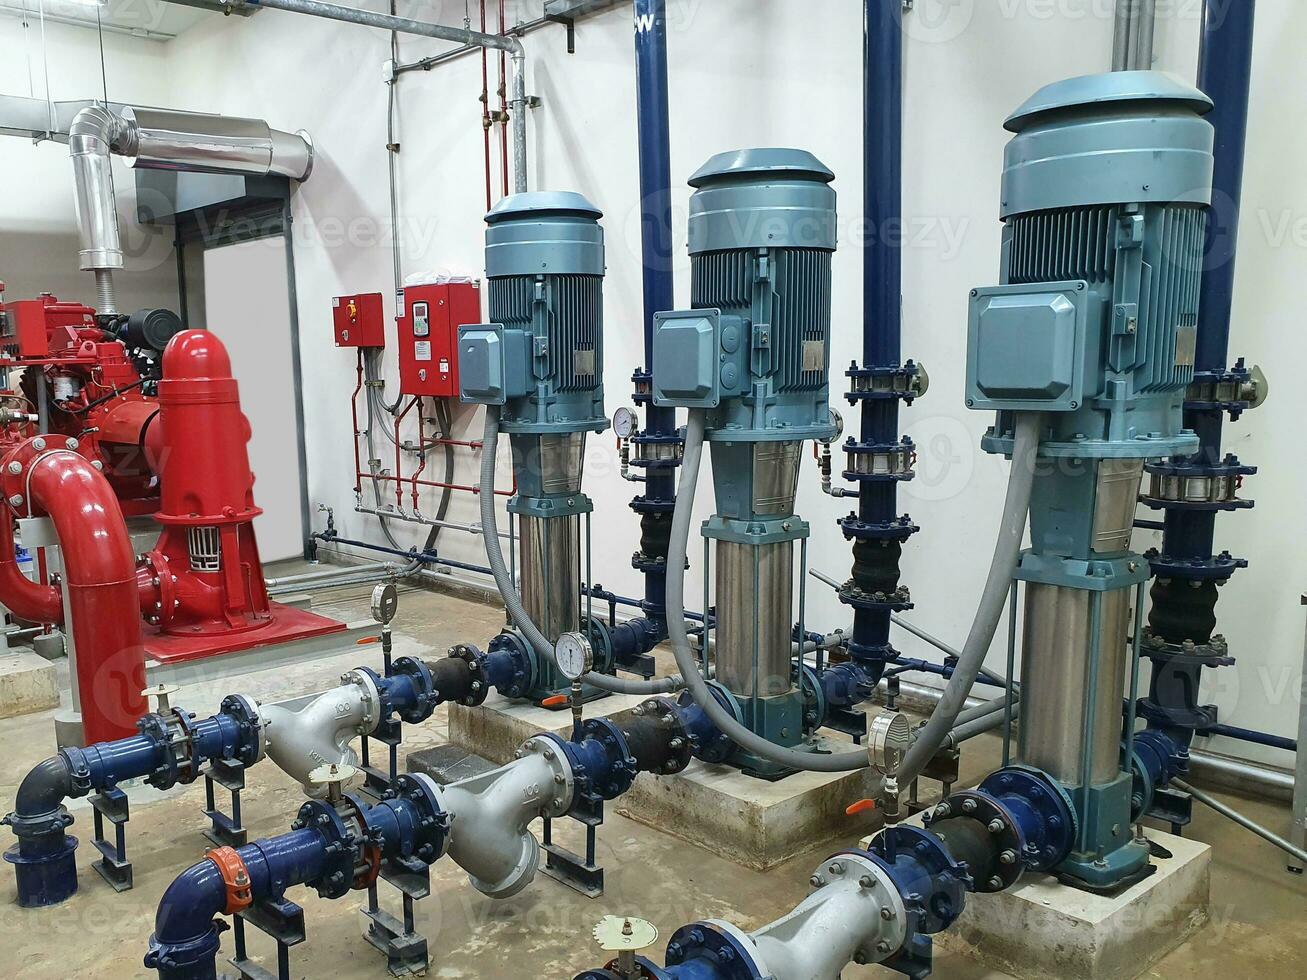 Water pump system in the building photo